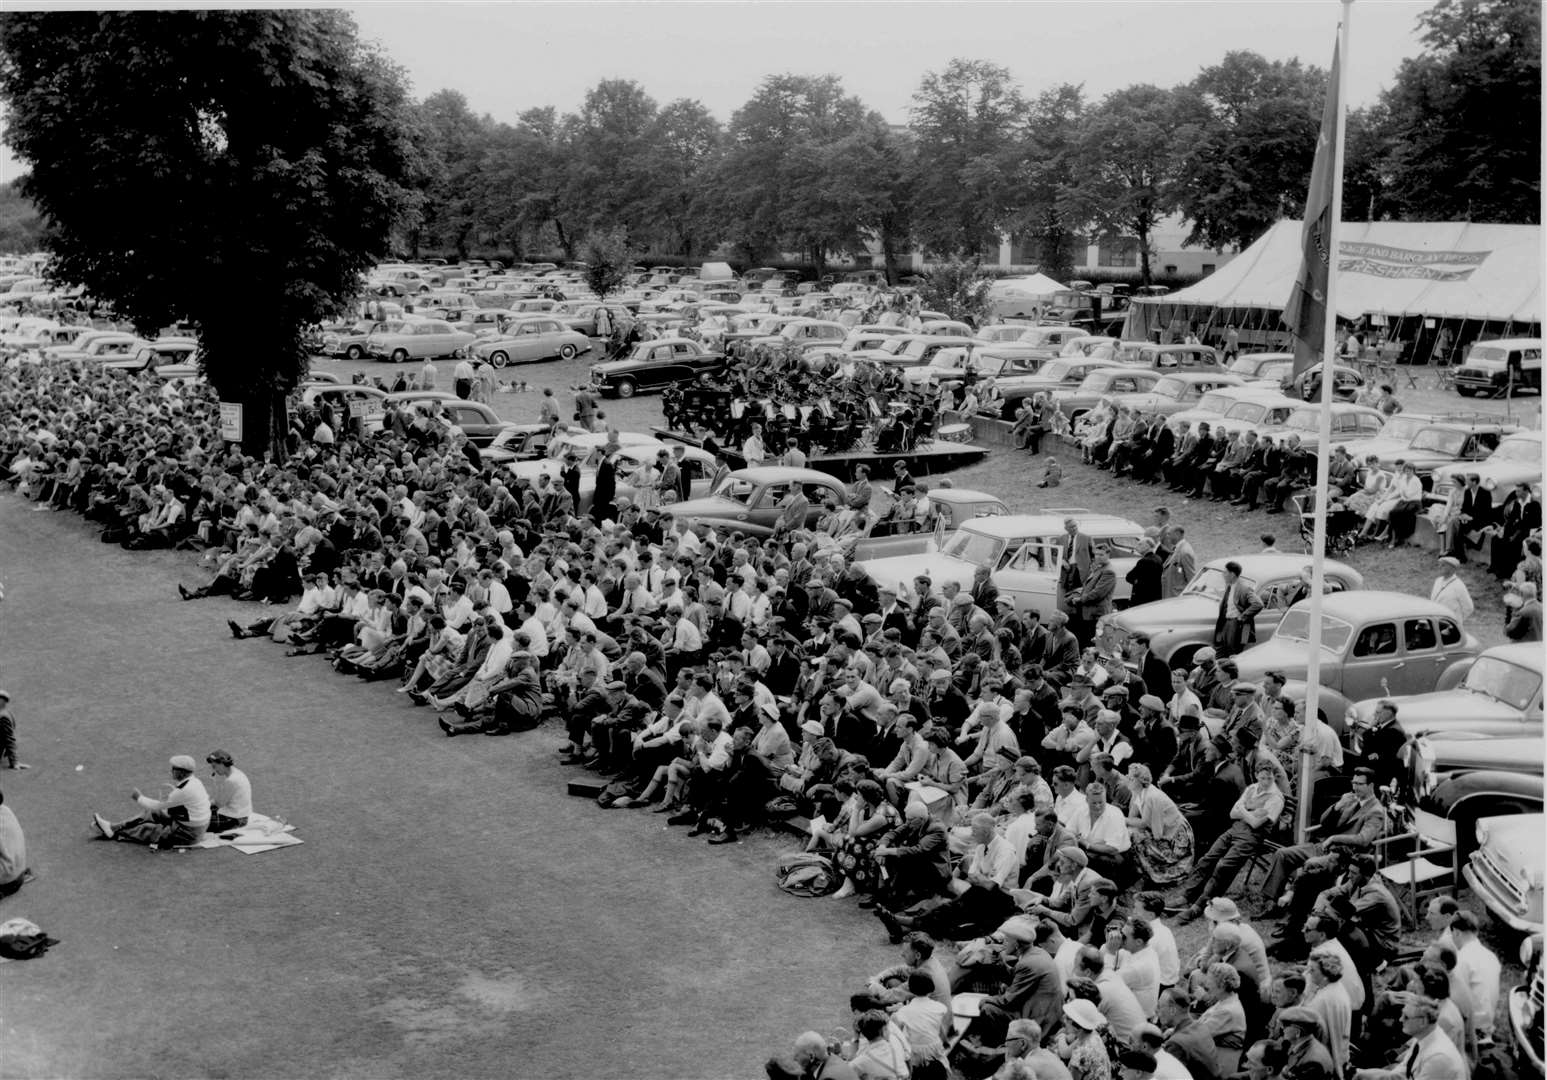 Crowds line the boundary for the 1959 Canterbury Cricket Week as Kent faced Hampshire and Derbyshire